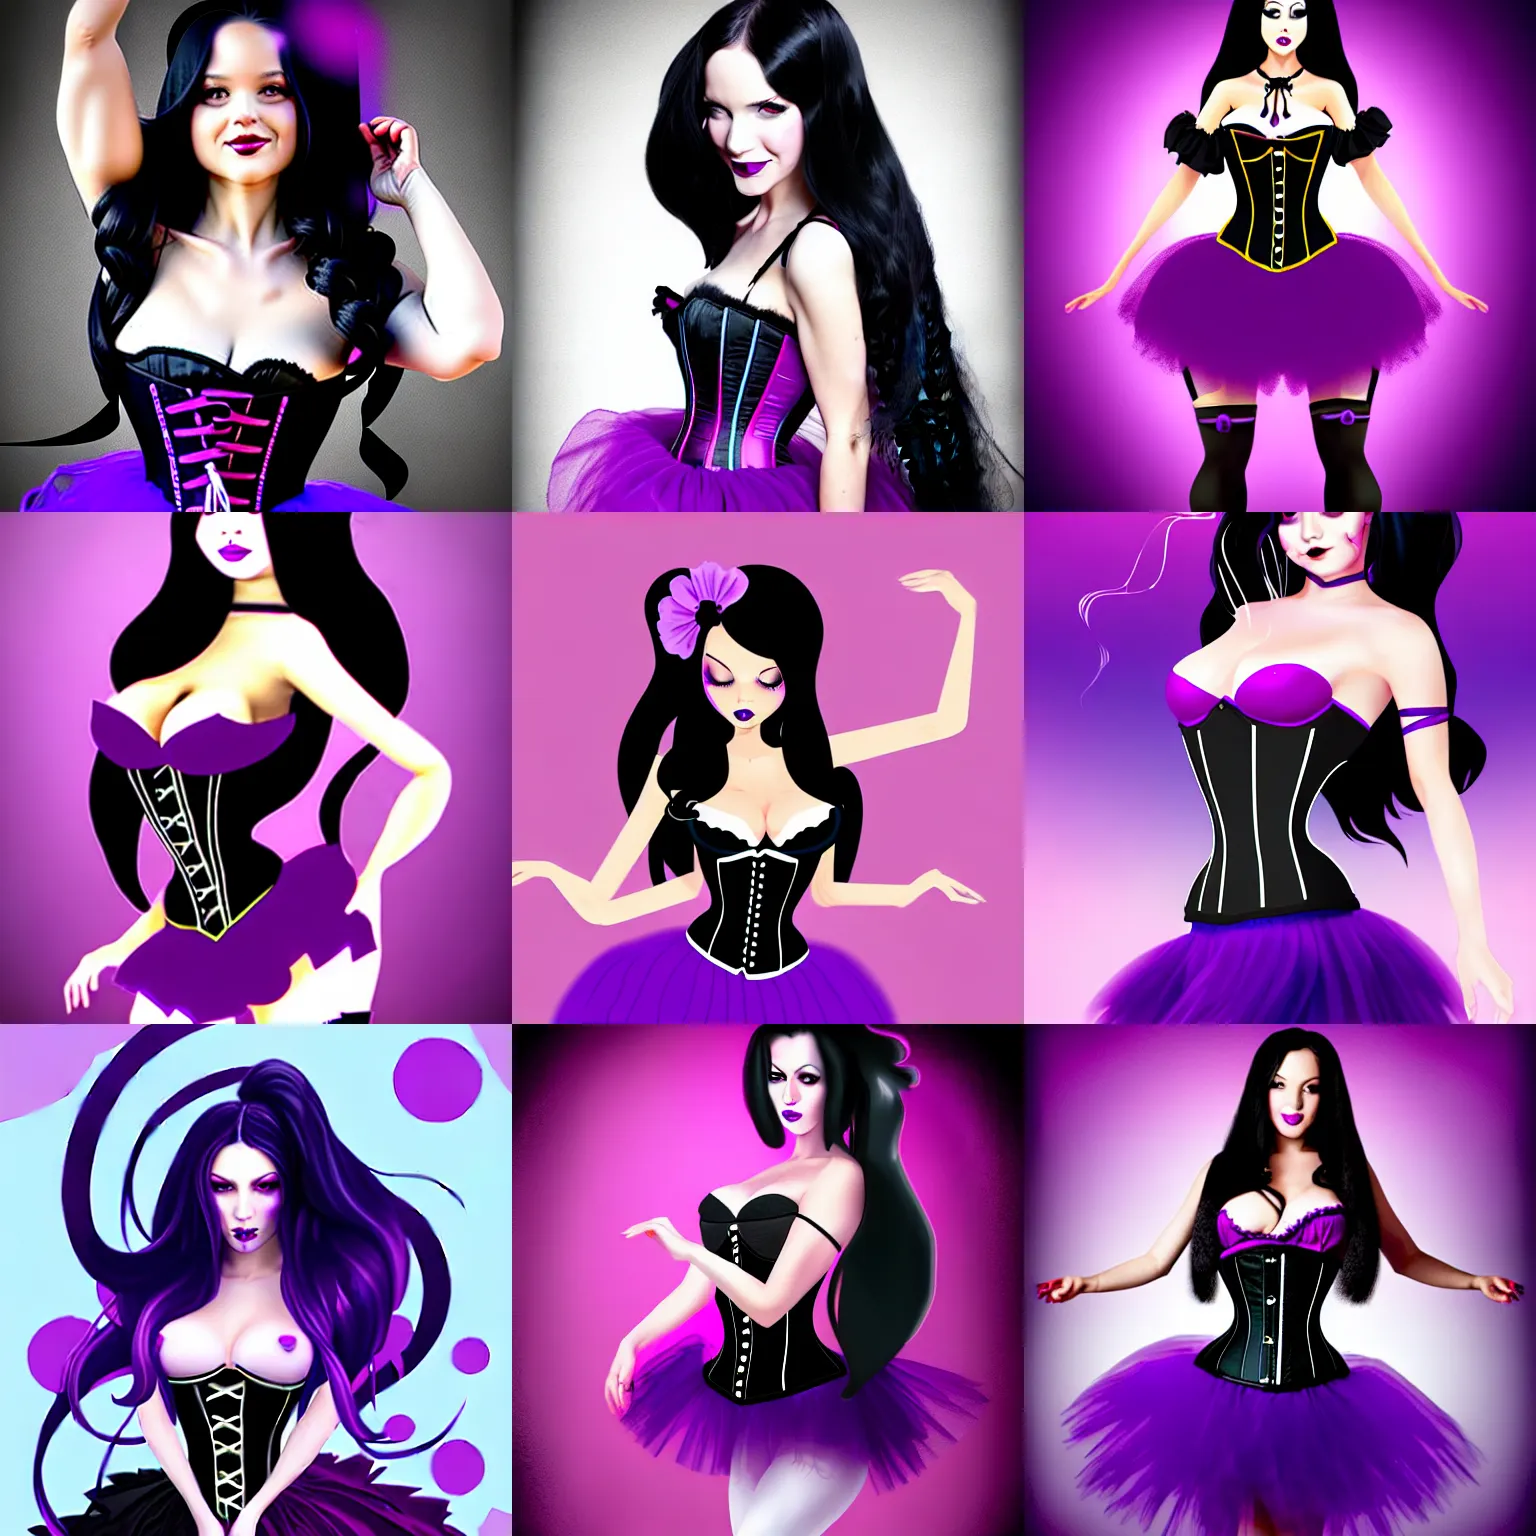 Prompt: a beautiful woman with long black hair, wearing a black corset top and a purple tutu, splash art